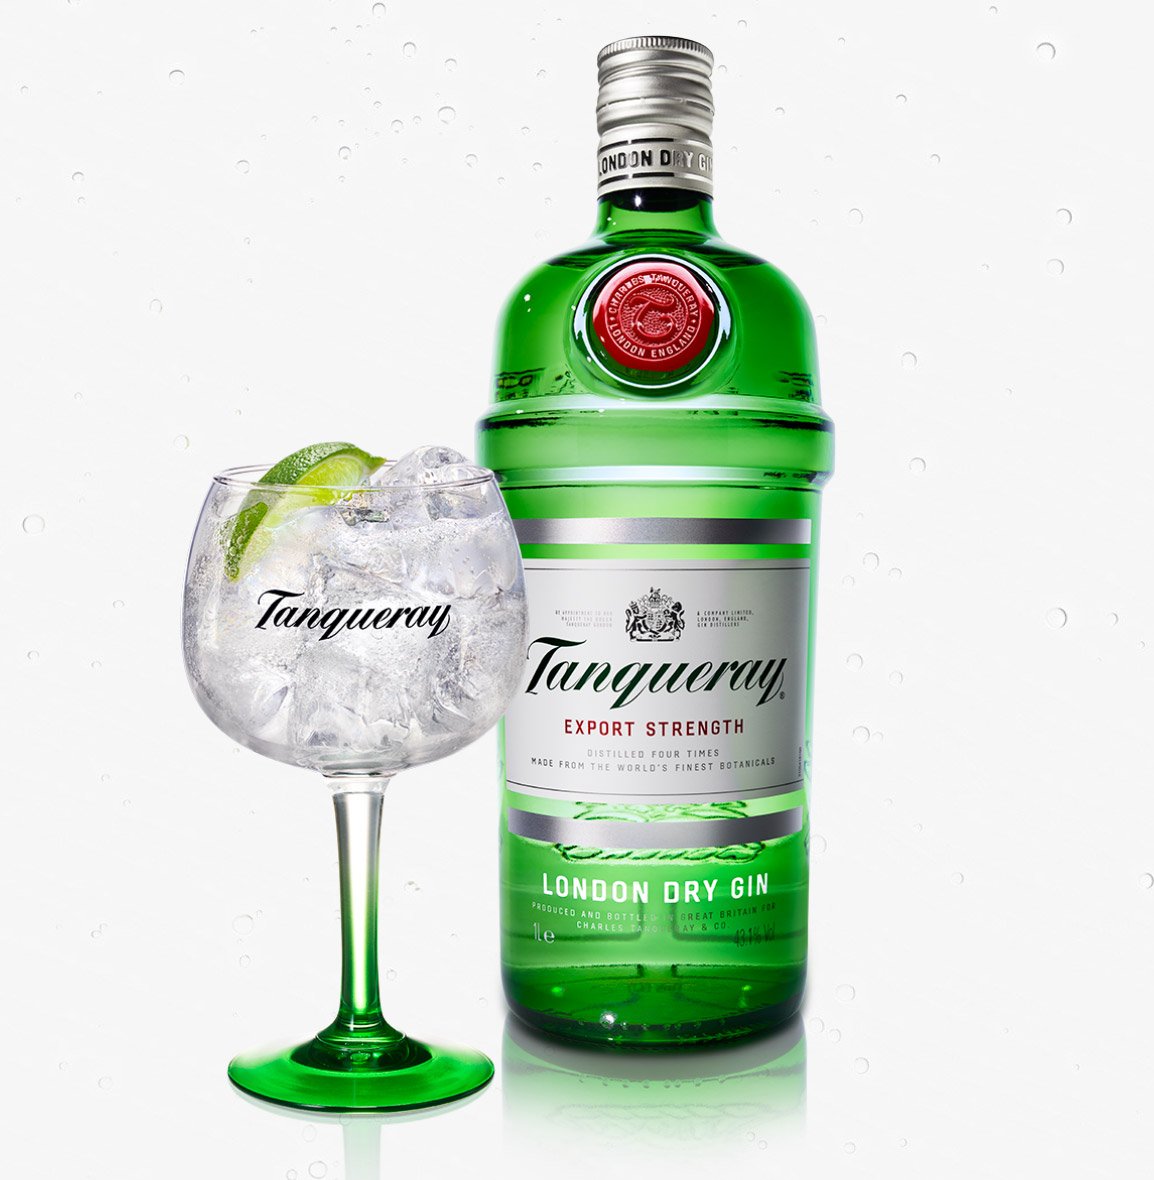 Is Tanqueray Gin Gluten Free?